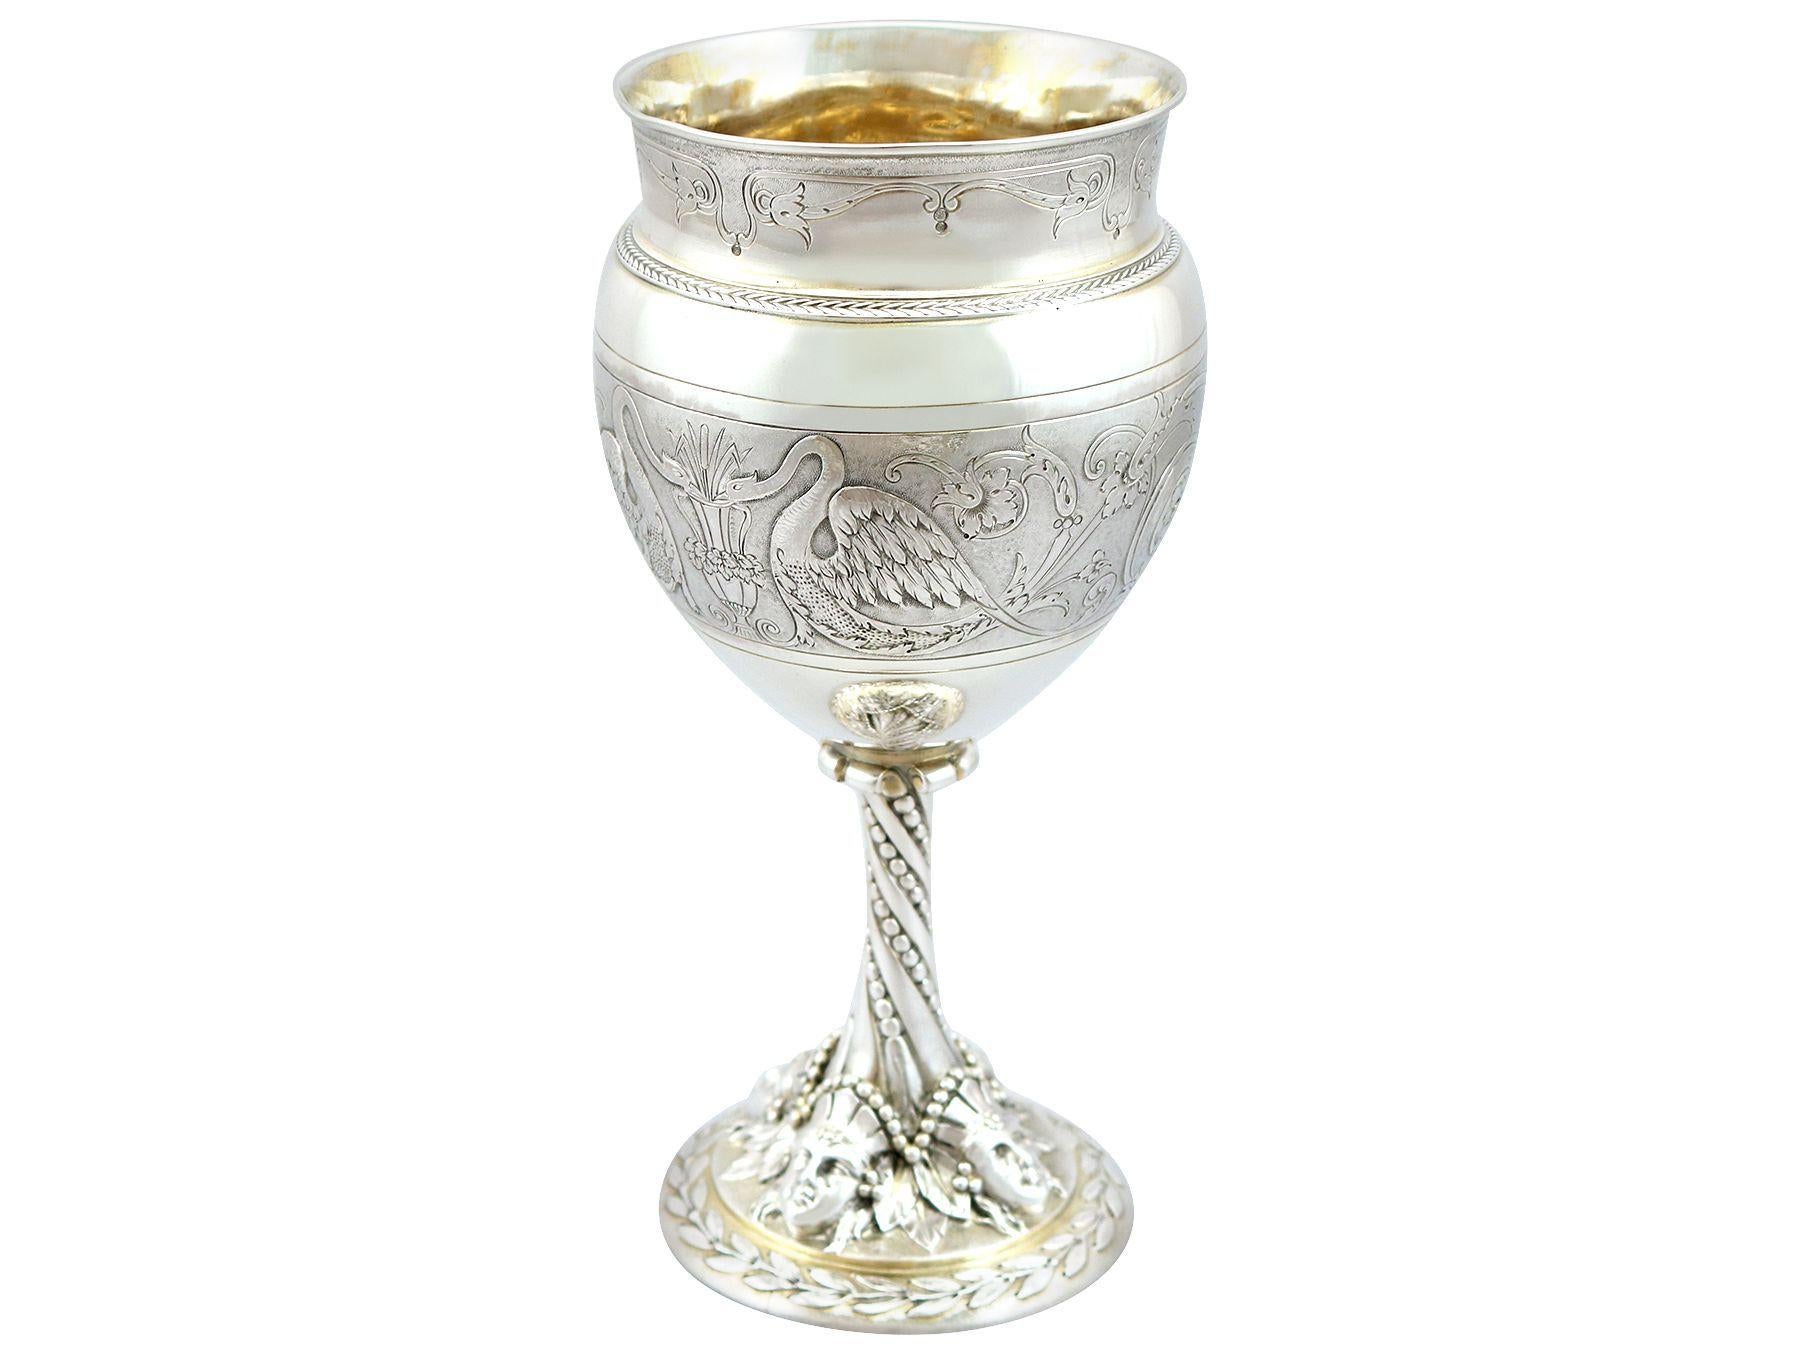 An exceptional, fine and impressive antique Victorian sterling silver gilt goblet; an addition to our wine and drinks related silverware collection.

This exceptional antique Victorian sterling silver gilt goblet has a circular bulbous-shaped form